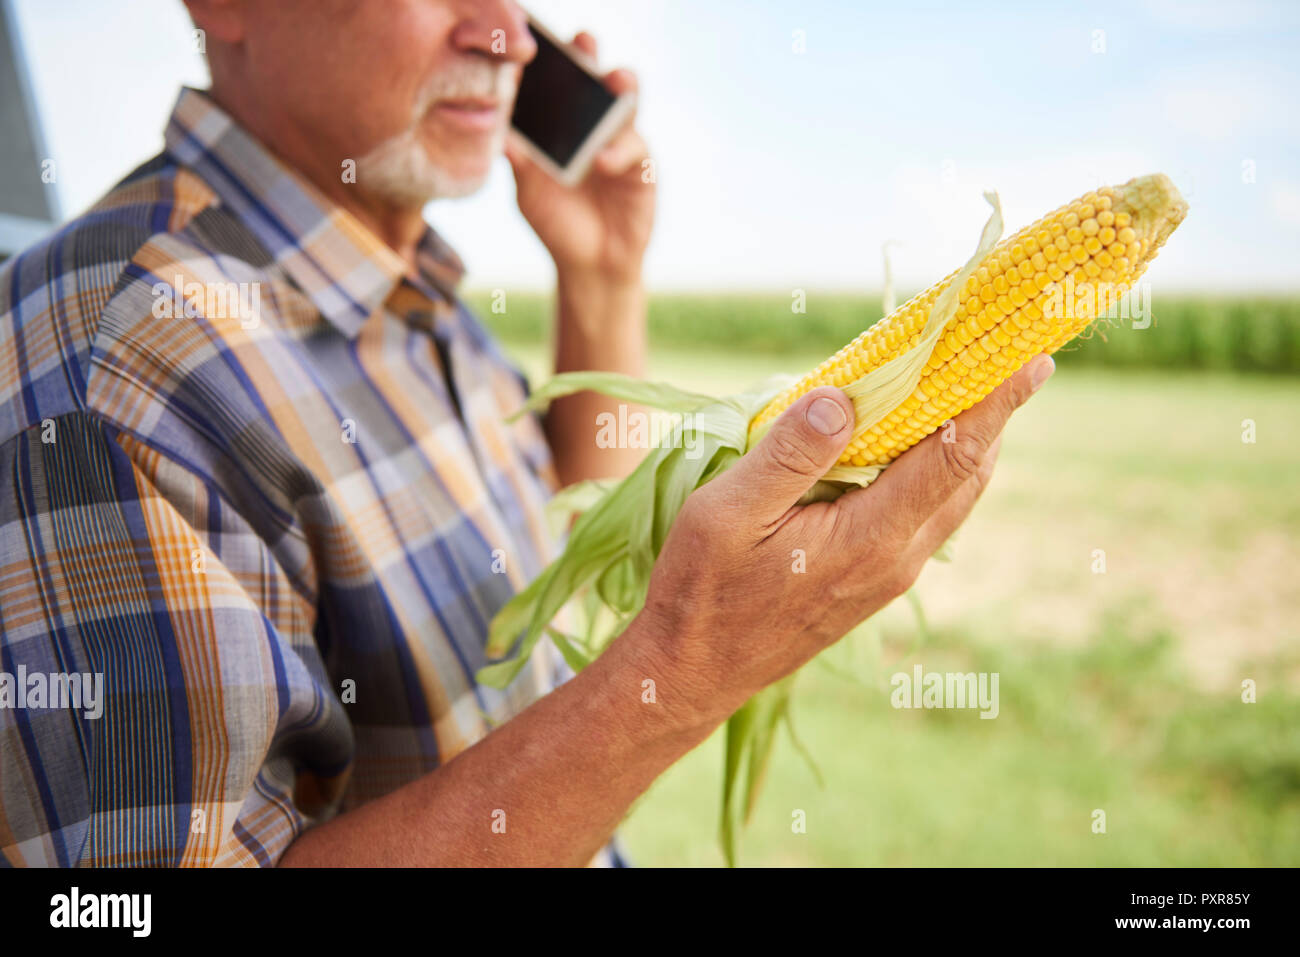 Farmer holding corn cob et talking on cell phone on field Banque D'Images